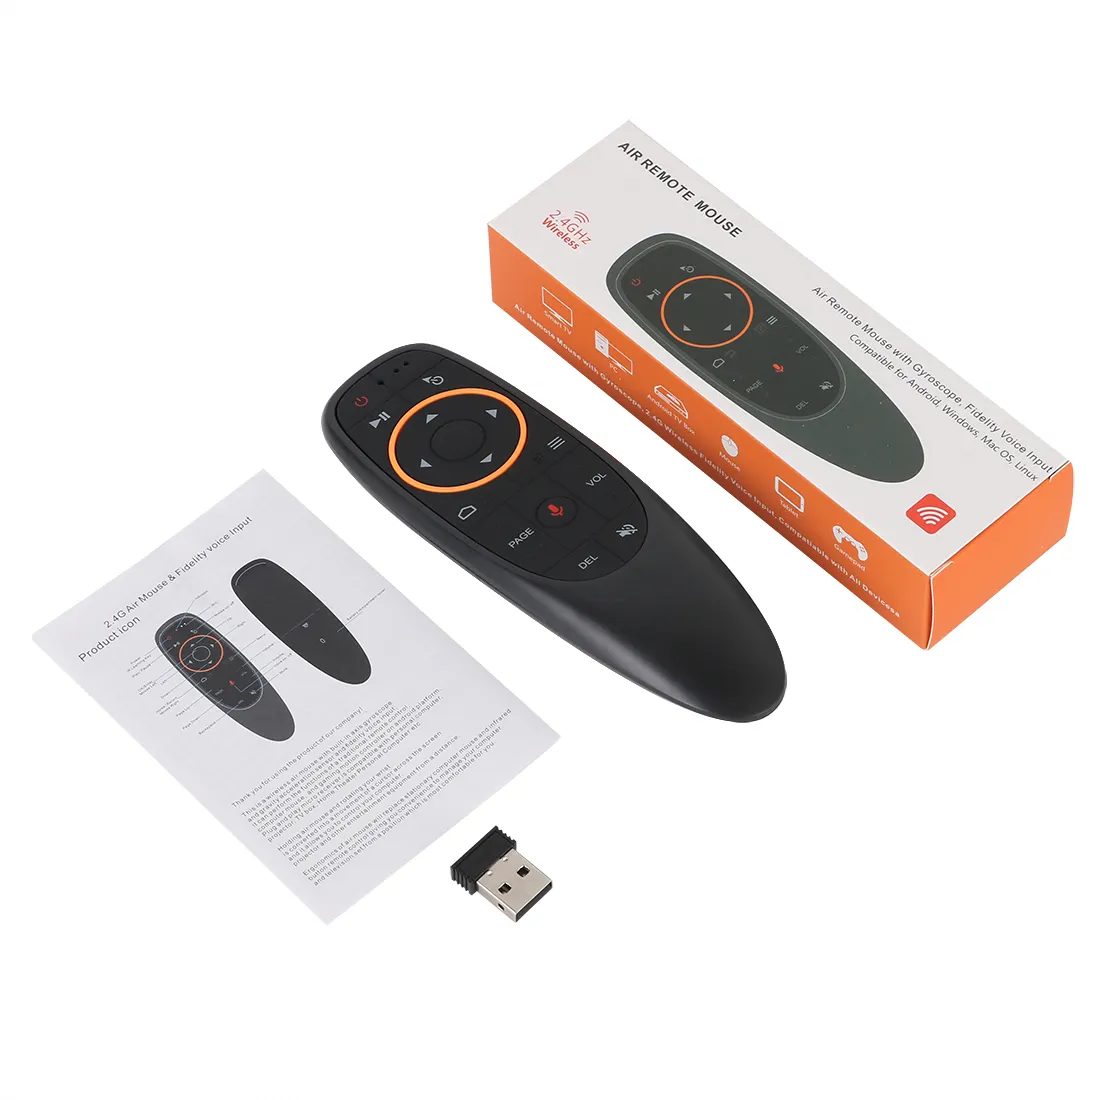 G10s Smart Voice Tv Remote Control 2.4g Gyroscope Wireless Keyboard Air Mouse With Microphone For X96 H96 Tx6 Android Tv Box